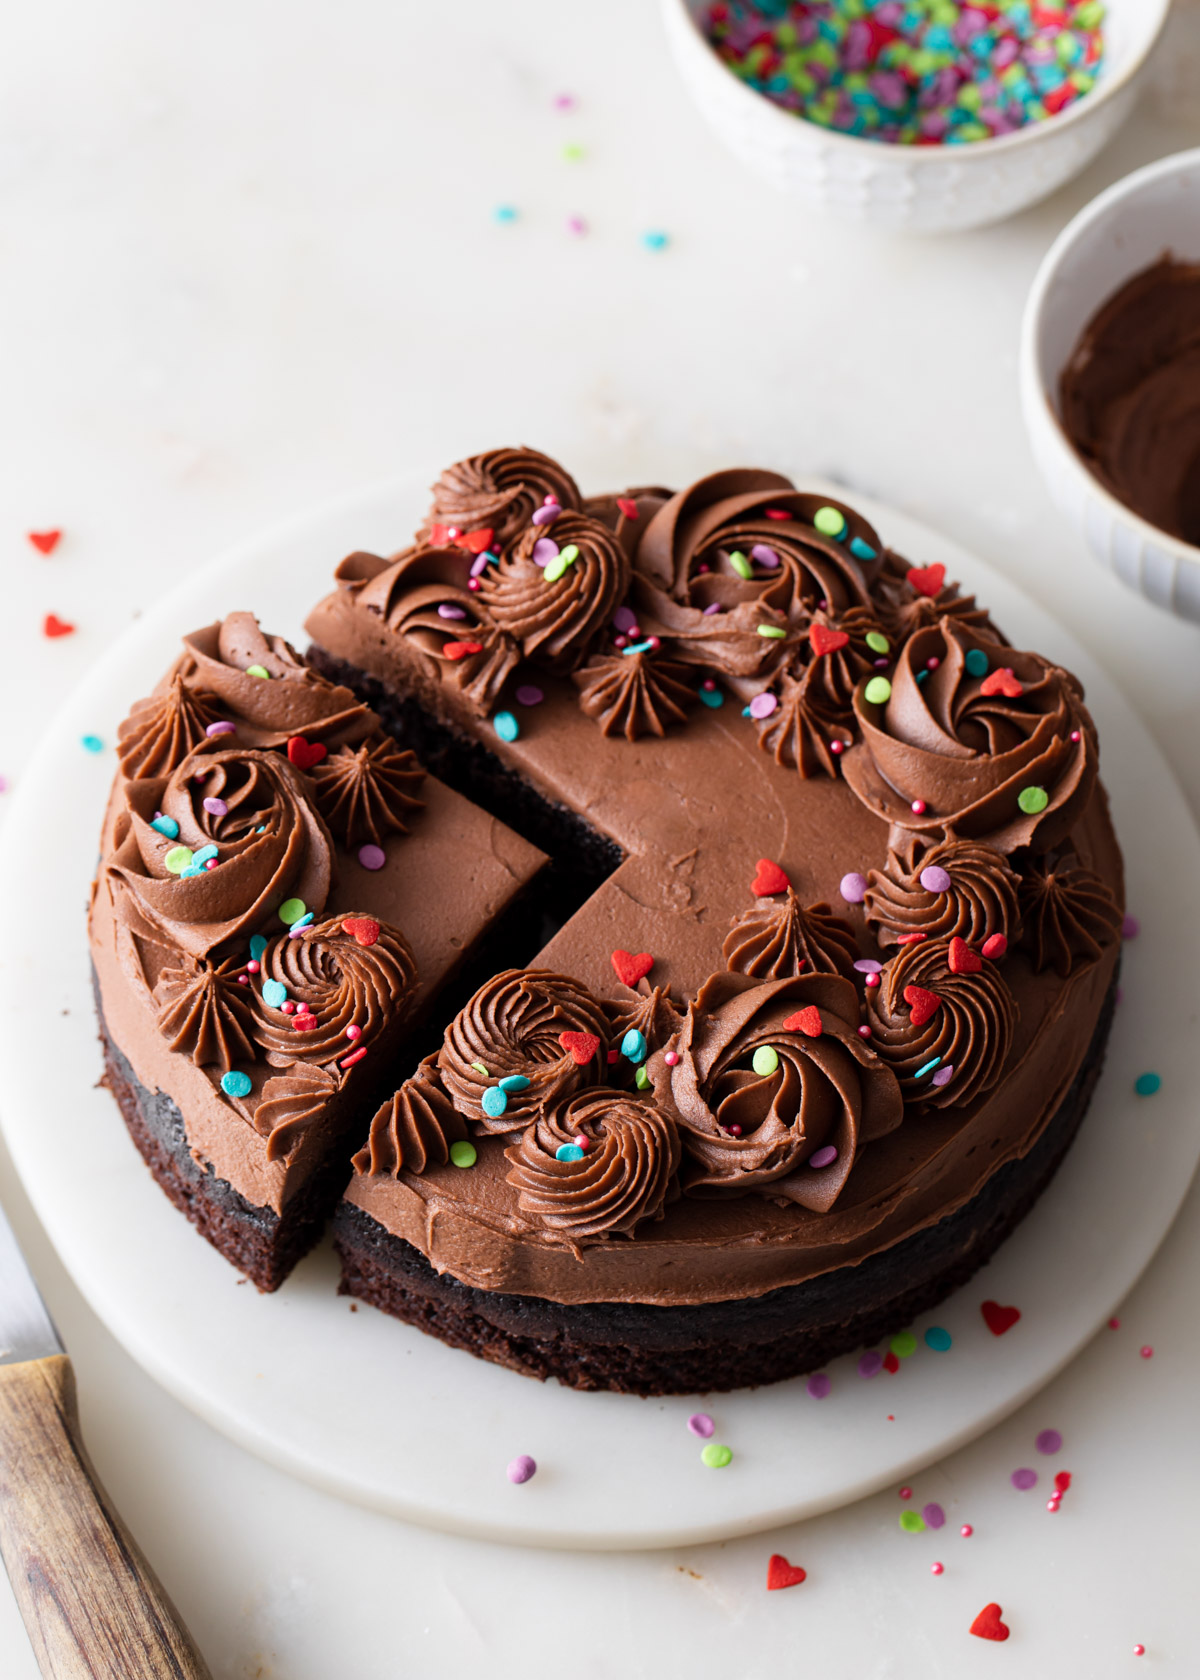 A mini chocolate cake for two with fudge frosting and sprinkles that's been sliced